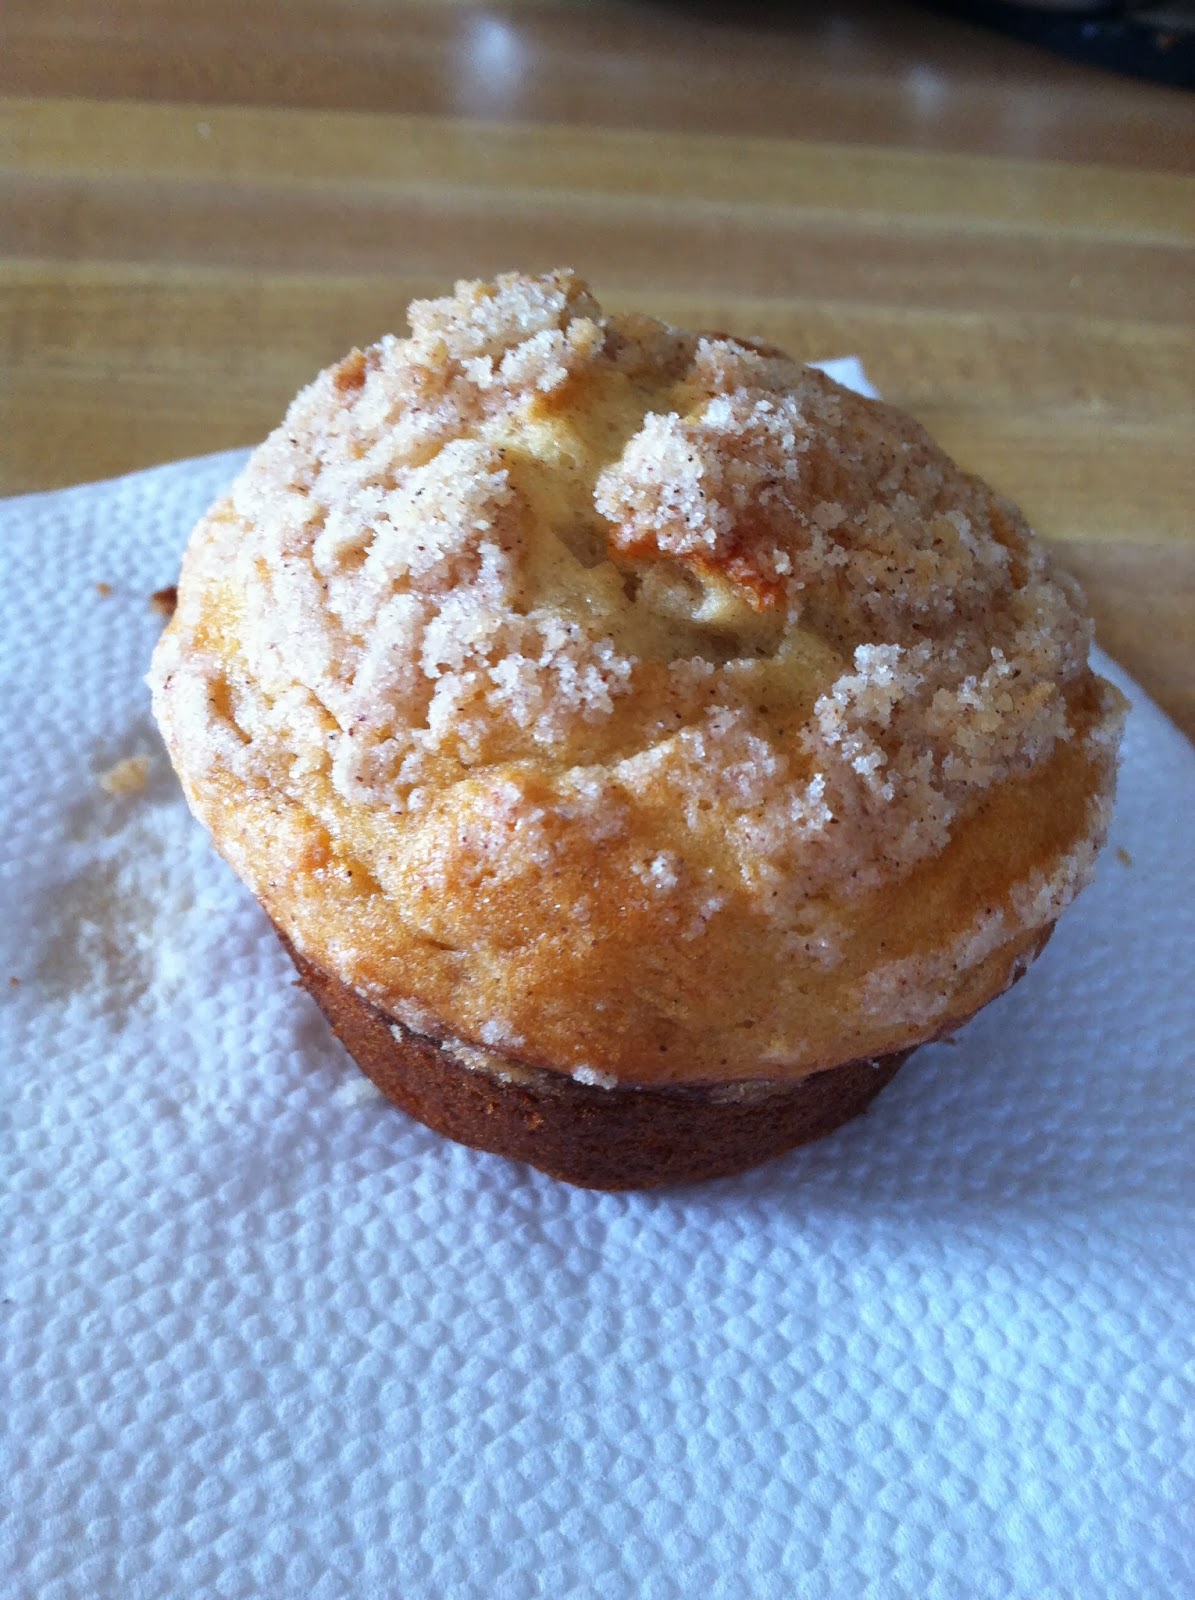 Made from Home Daily: The BEST Banana Streusel Muffins